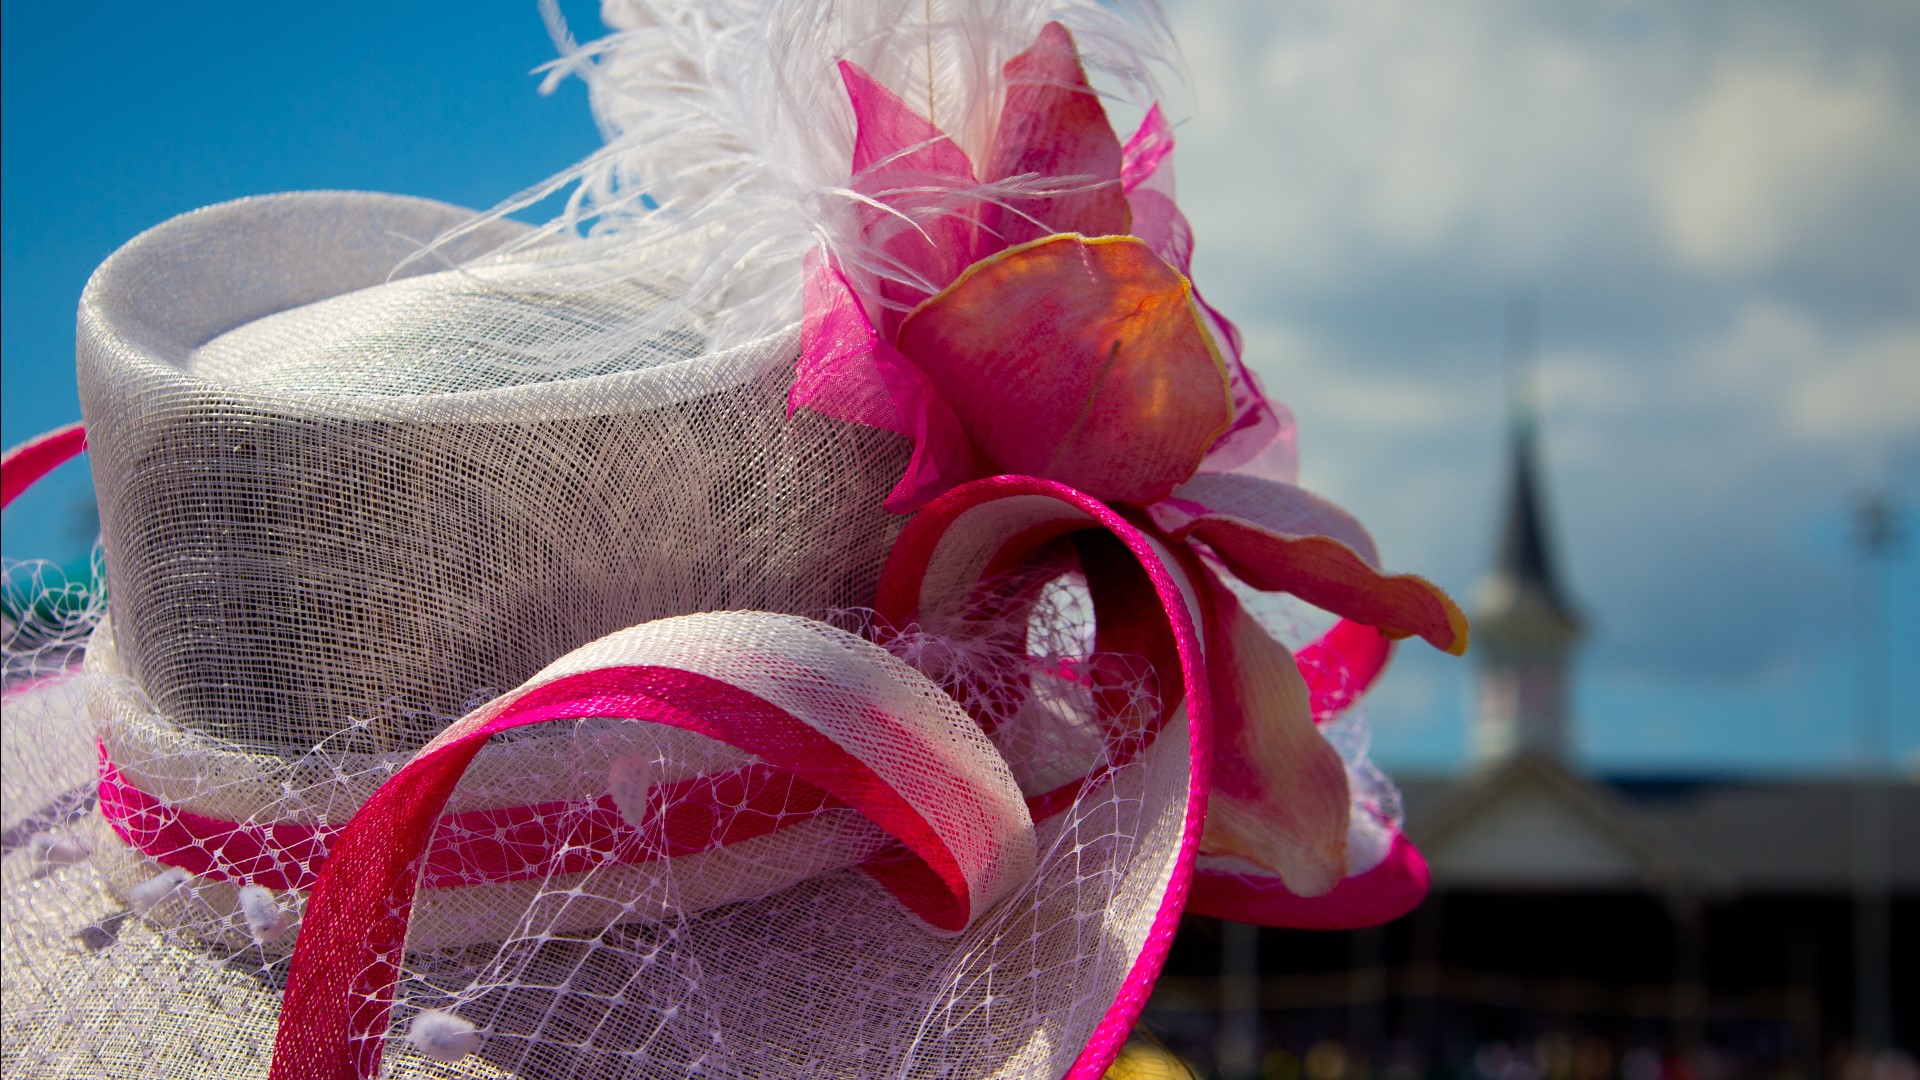 Wear your Kentucky Derby fascinator or hat and visit any one of 7 Brew's locations in the Louisville-area for the discount.